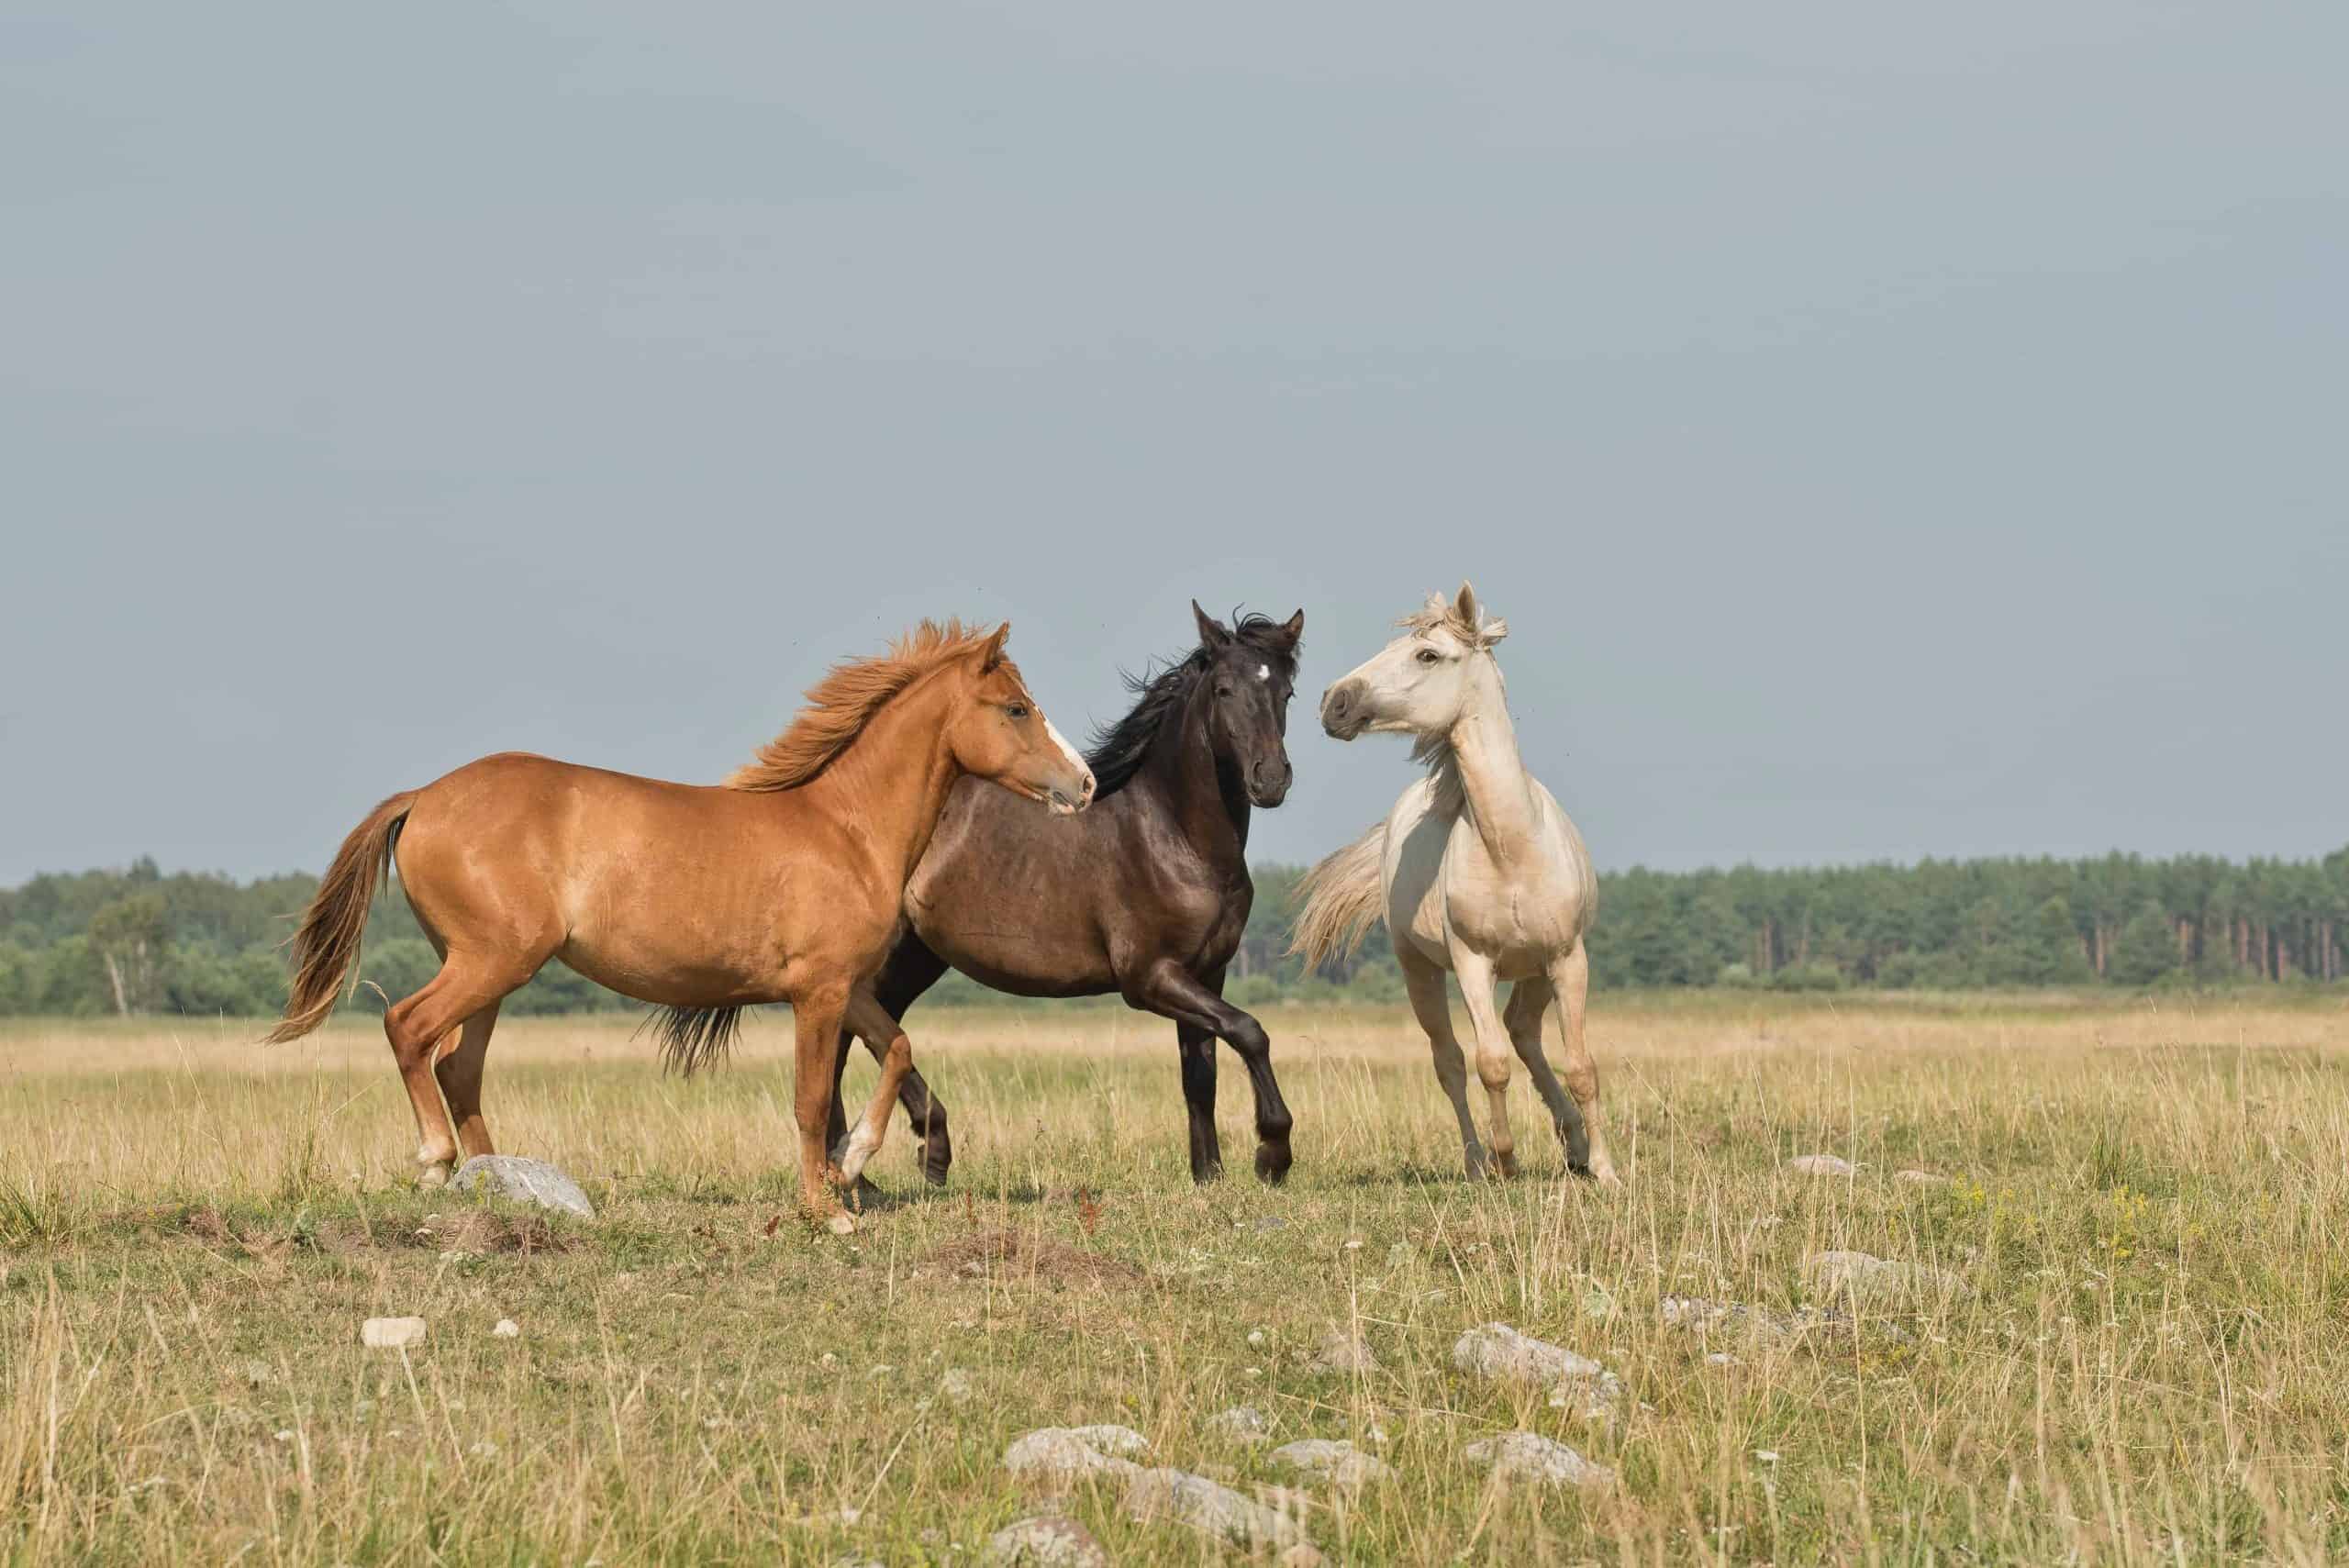 Three horses spend time together in an open field.